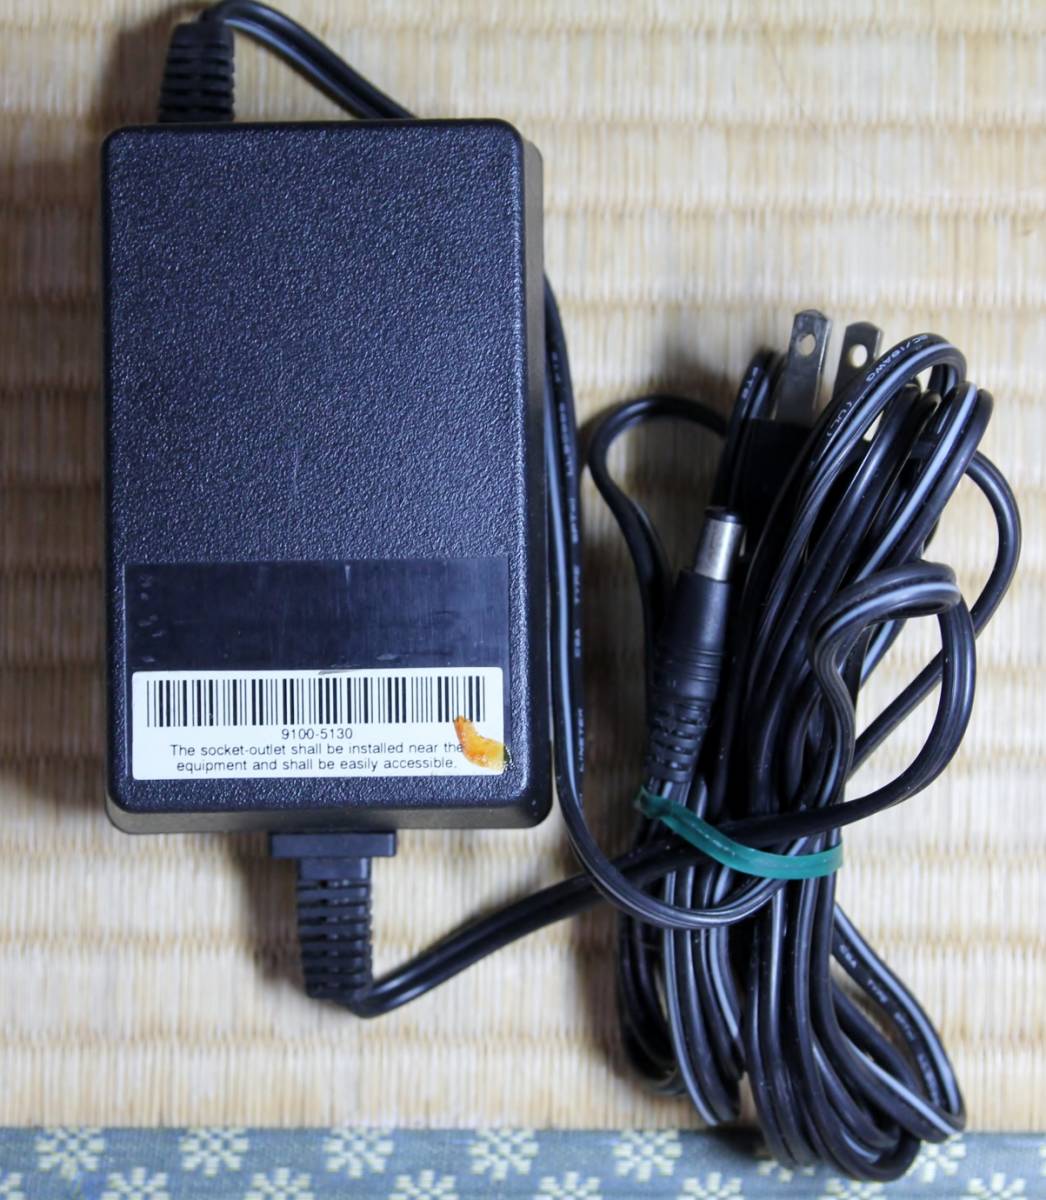 HEWLETT-PACKARD C2178A DC30V,400mA used voltage tester .. has confirmed 